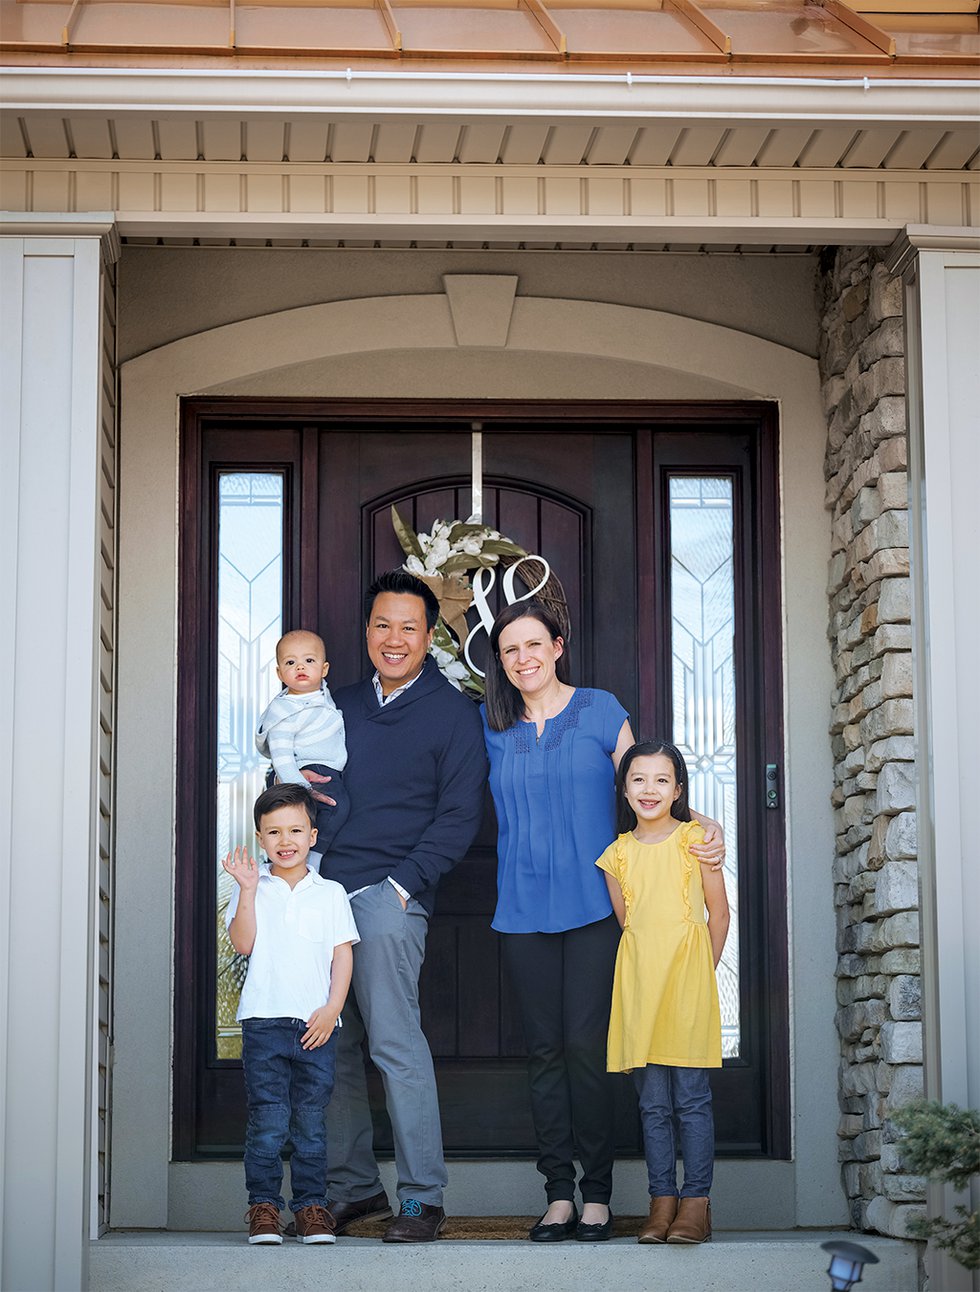 White Orchids' Owner Jeff Virojanapa and family